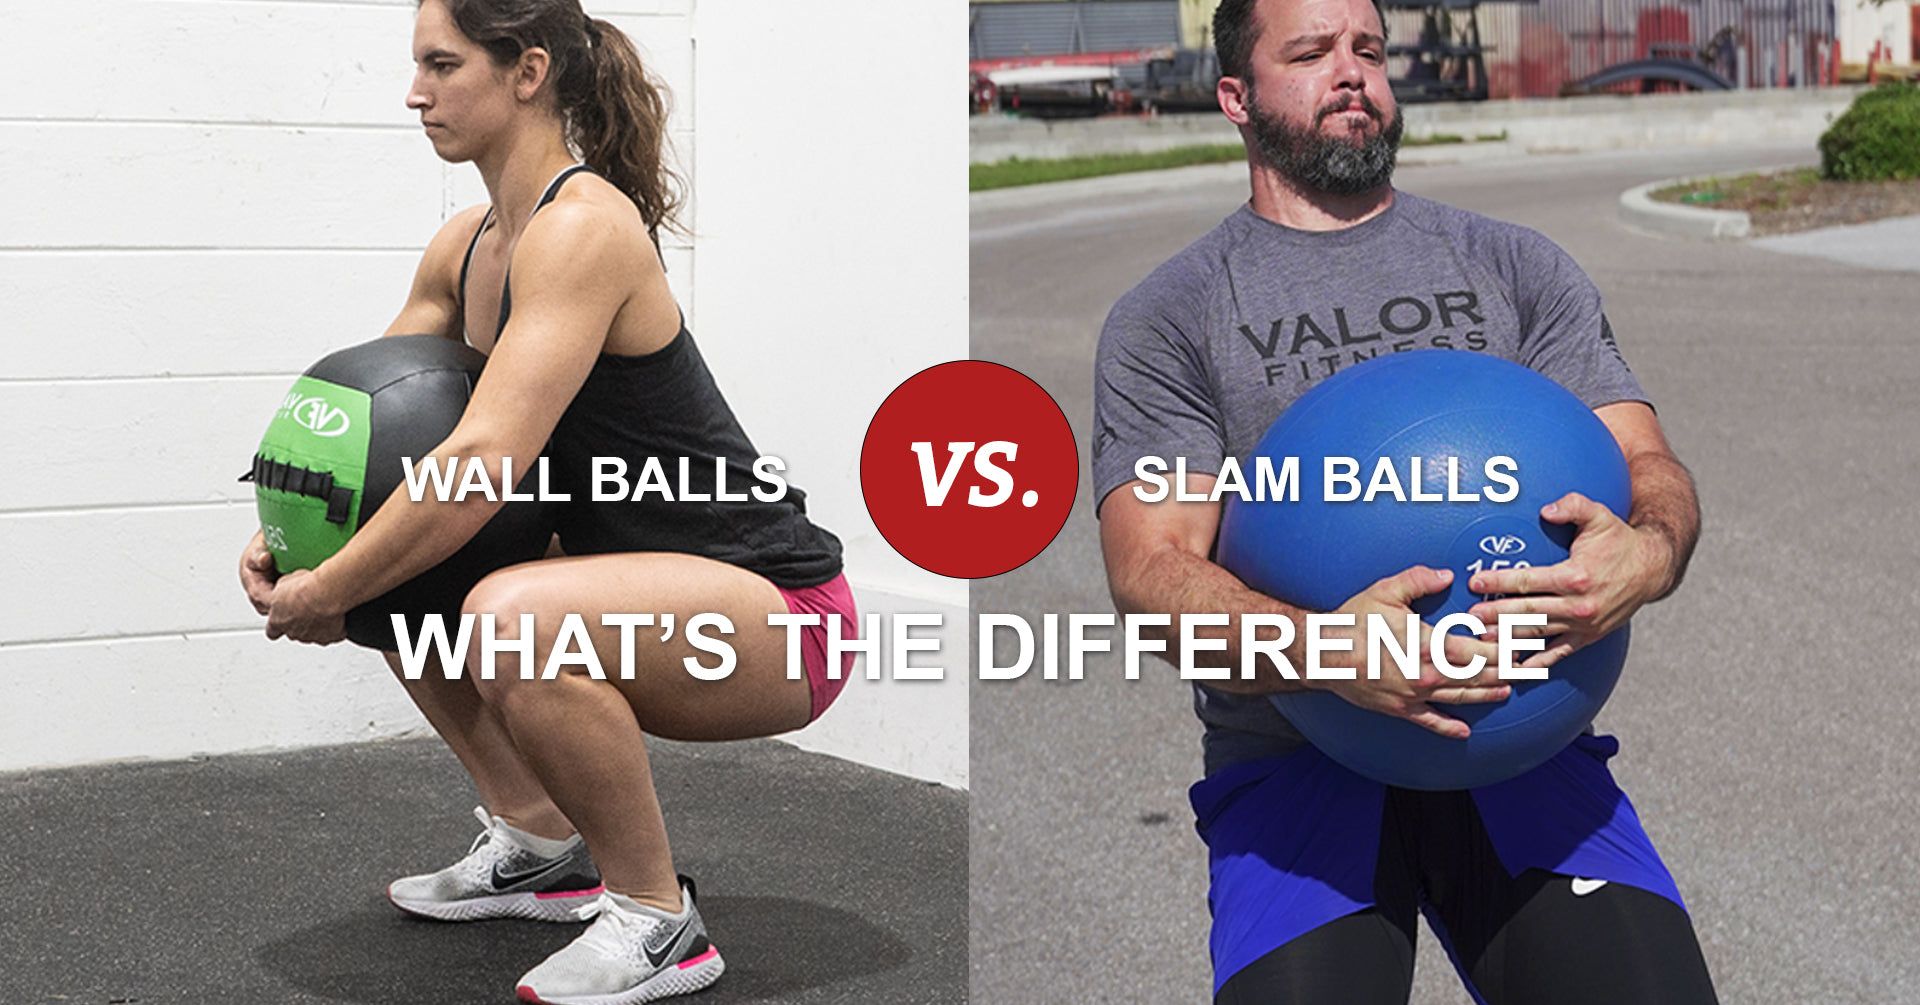 What Are the Differences Between The Wall Ball & Slam Ball?